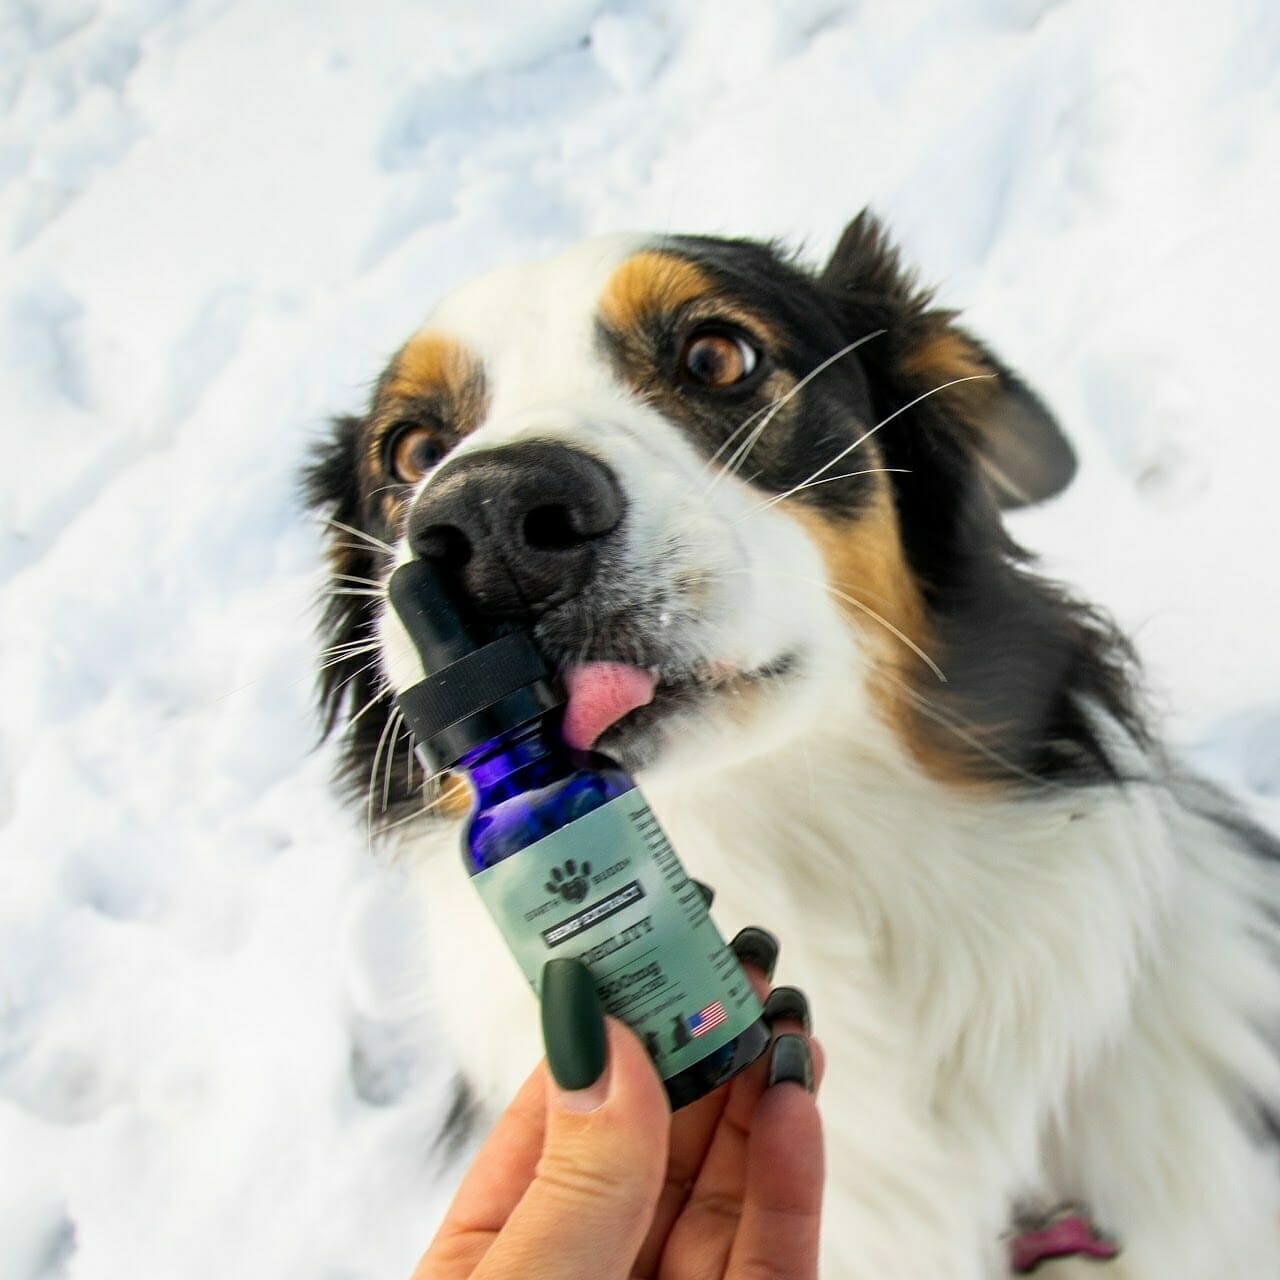 When does cbd oil start working for dogs? A dog licking a bottle of Earth Buddy Mobility with CBDa.